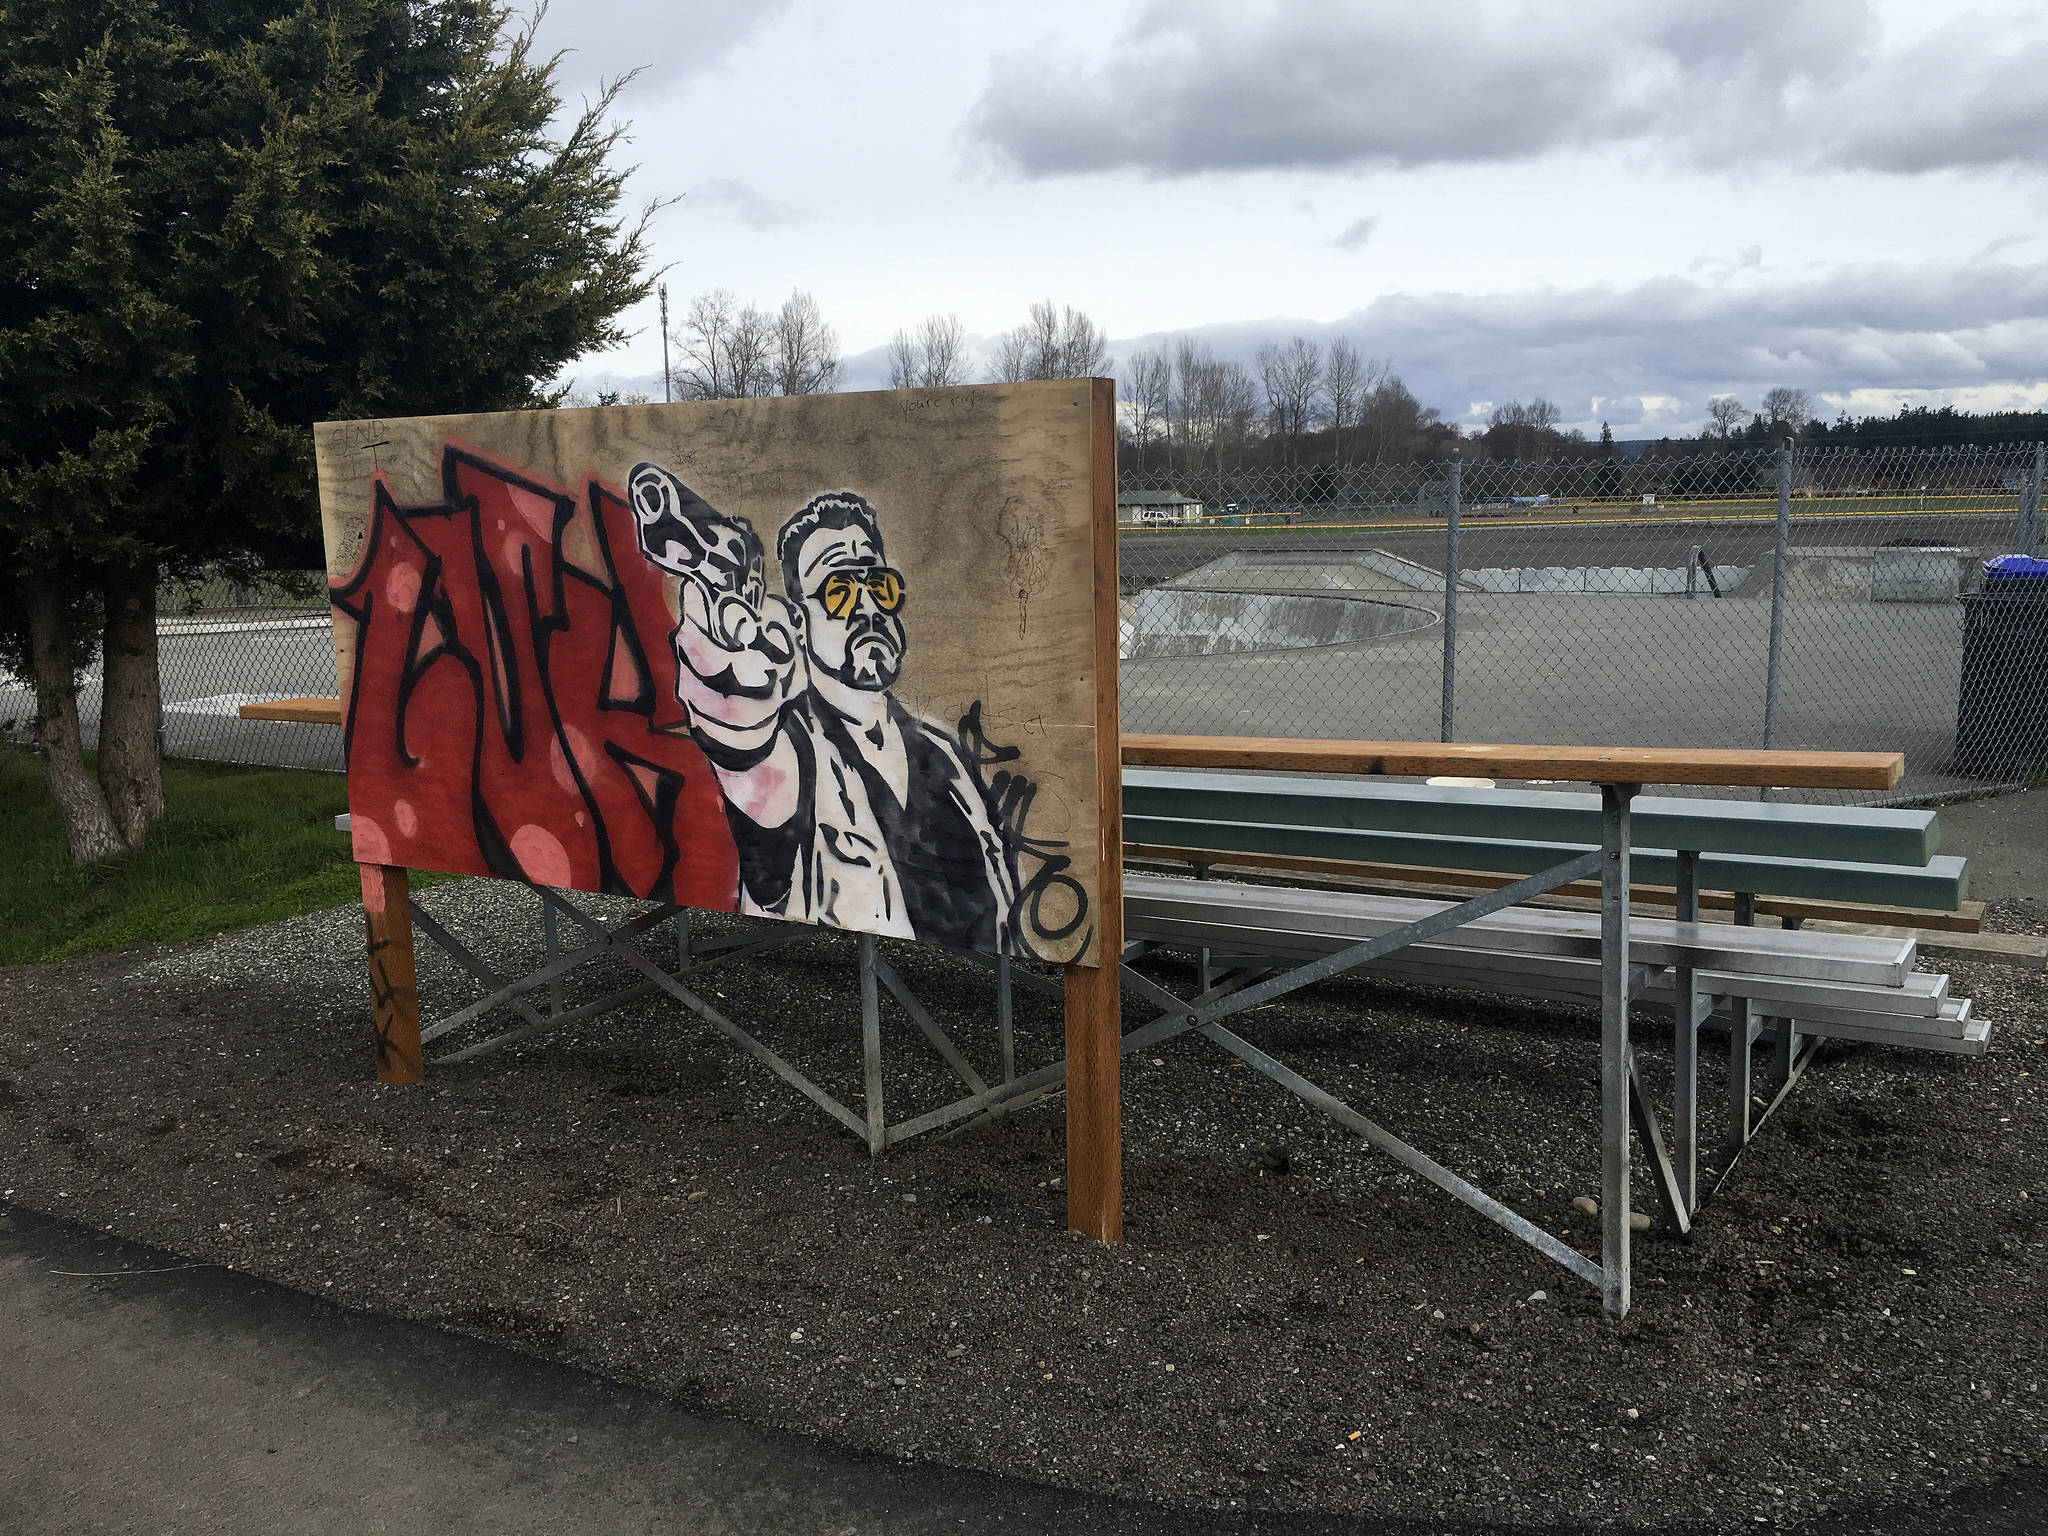 City of Sequim staff say a graffiti board at the Sequim Skate Park has deterred graffiti in the park since late 2012. However, a recent image depicting a gun has angered locals, leading city staff to enact a policy to paint over the board every two weeks. (Matthew Nash /Olympic Peninsula News Group)